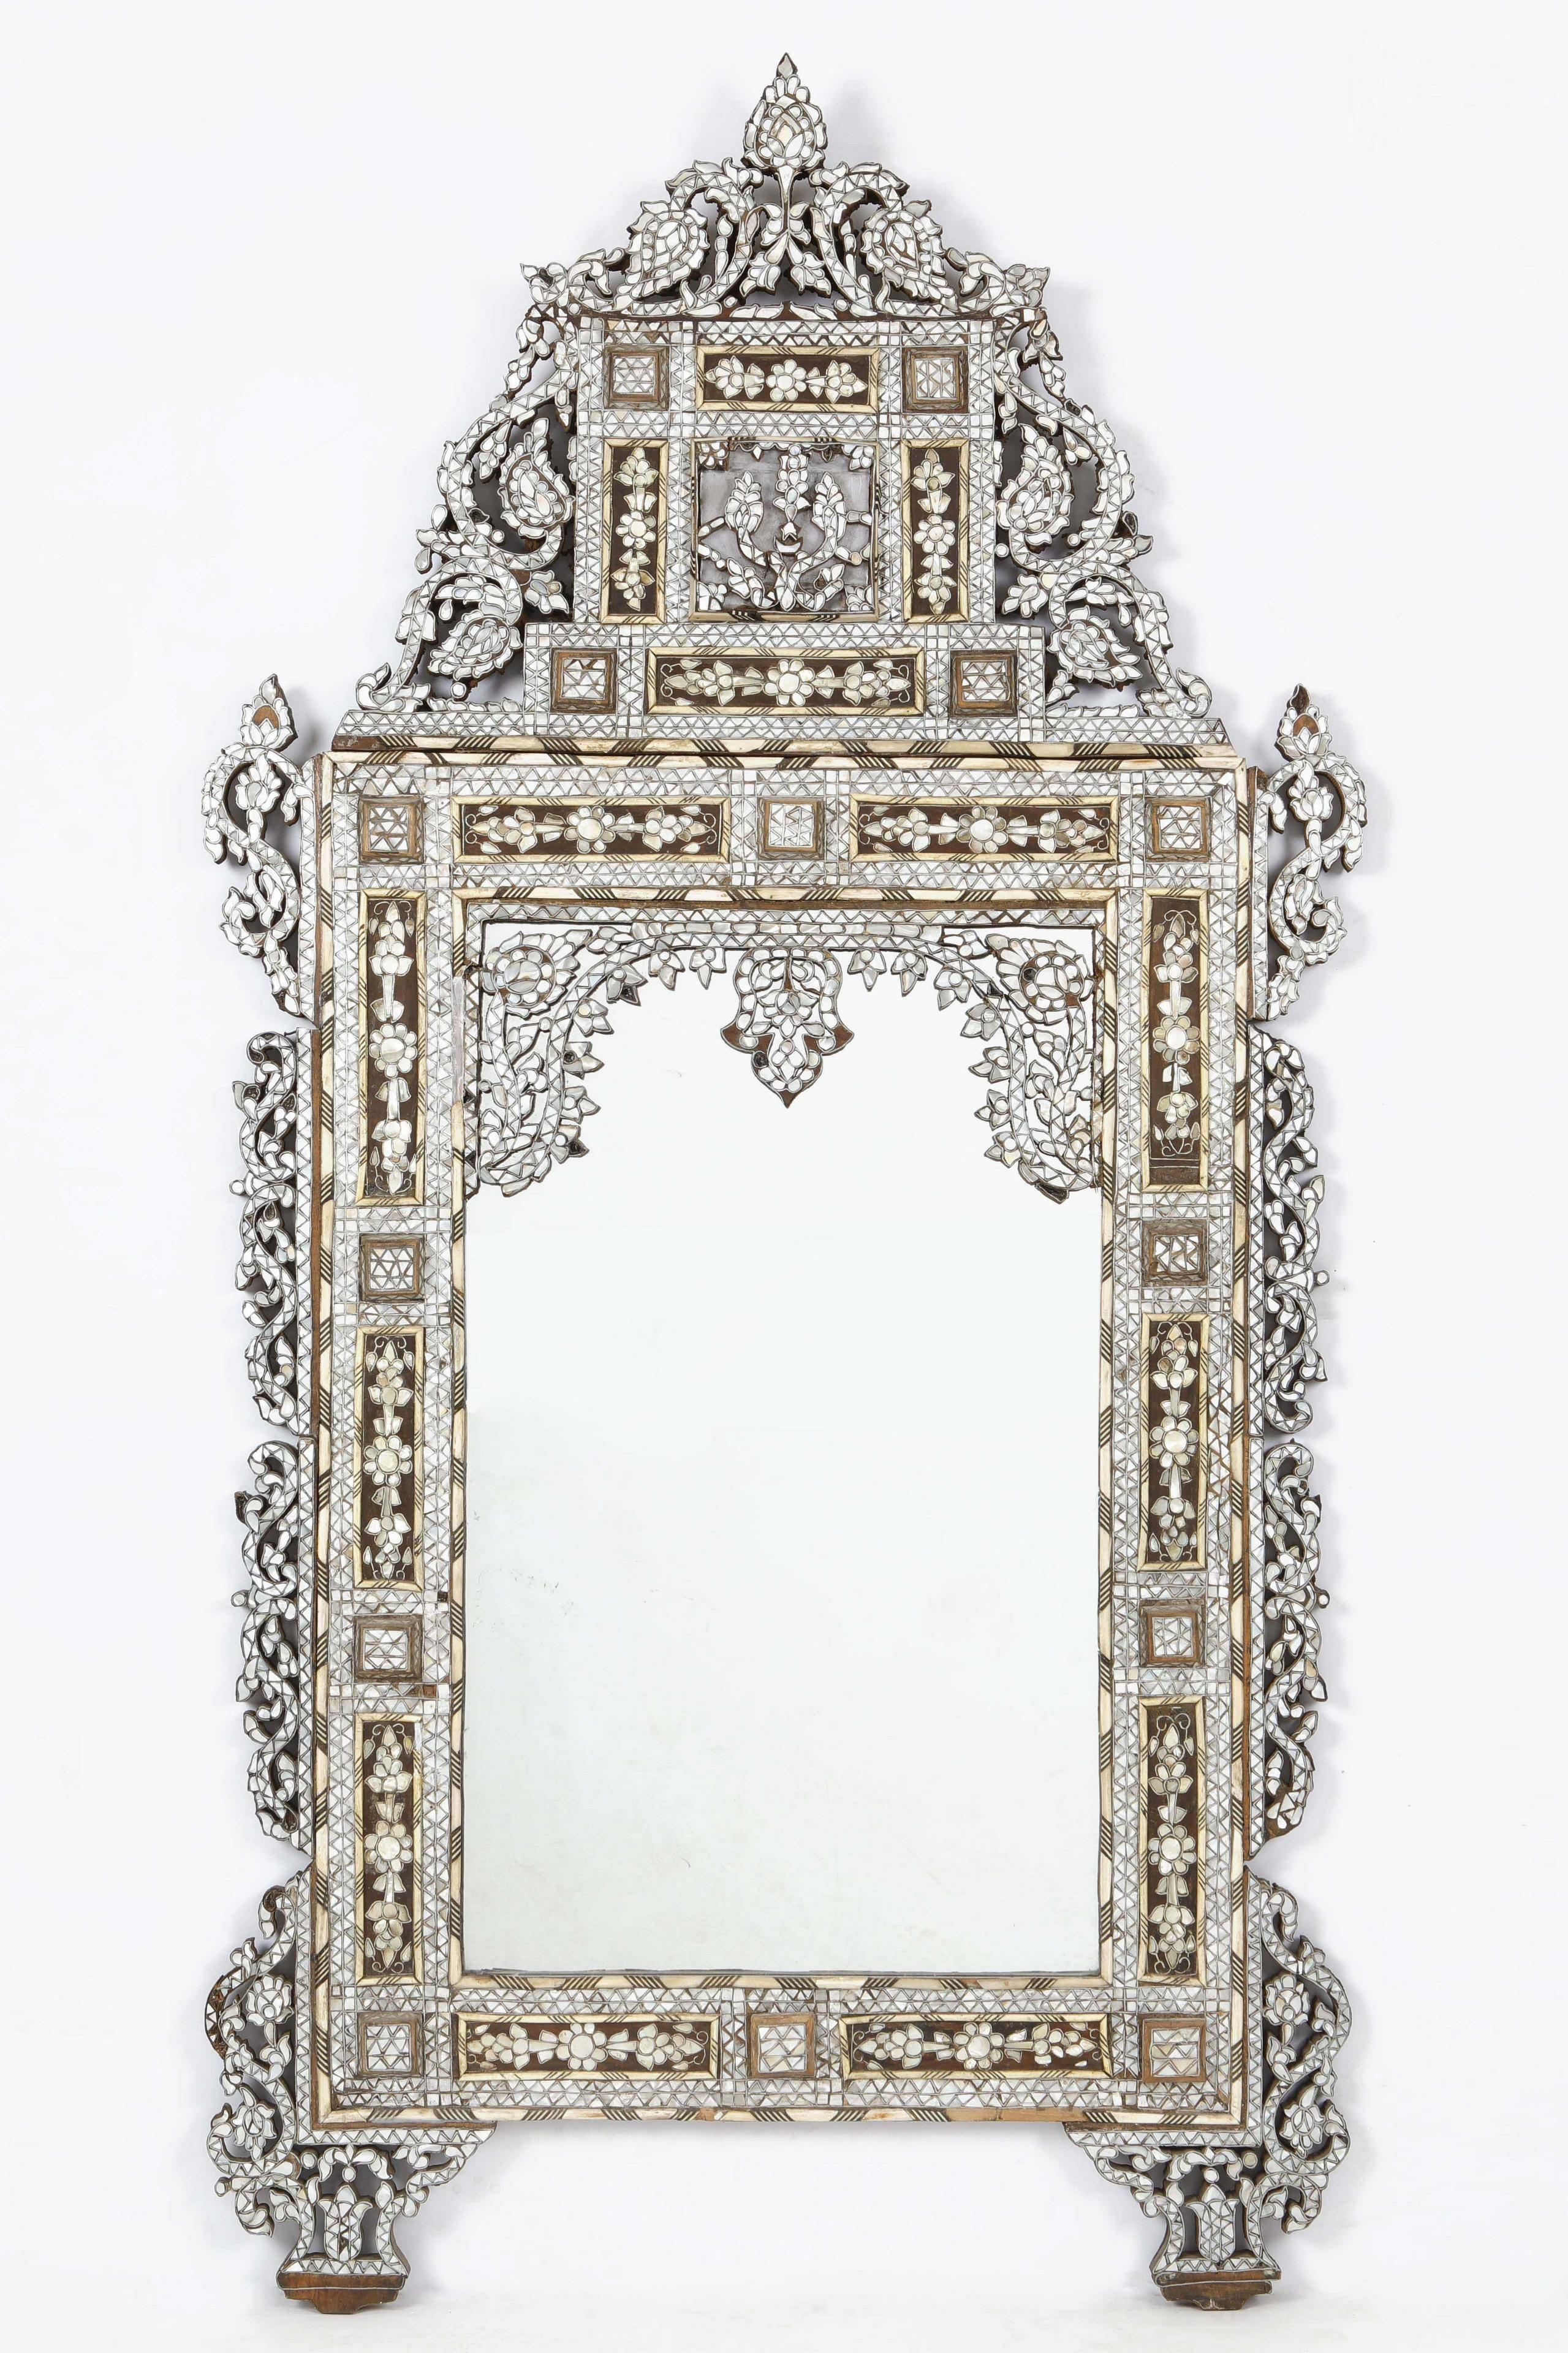 Moroccan Levantine Mother of Pearl Inlaid Mirror, Late 19th/Early 20th Century